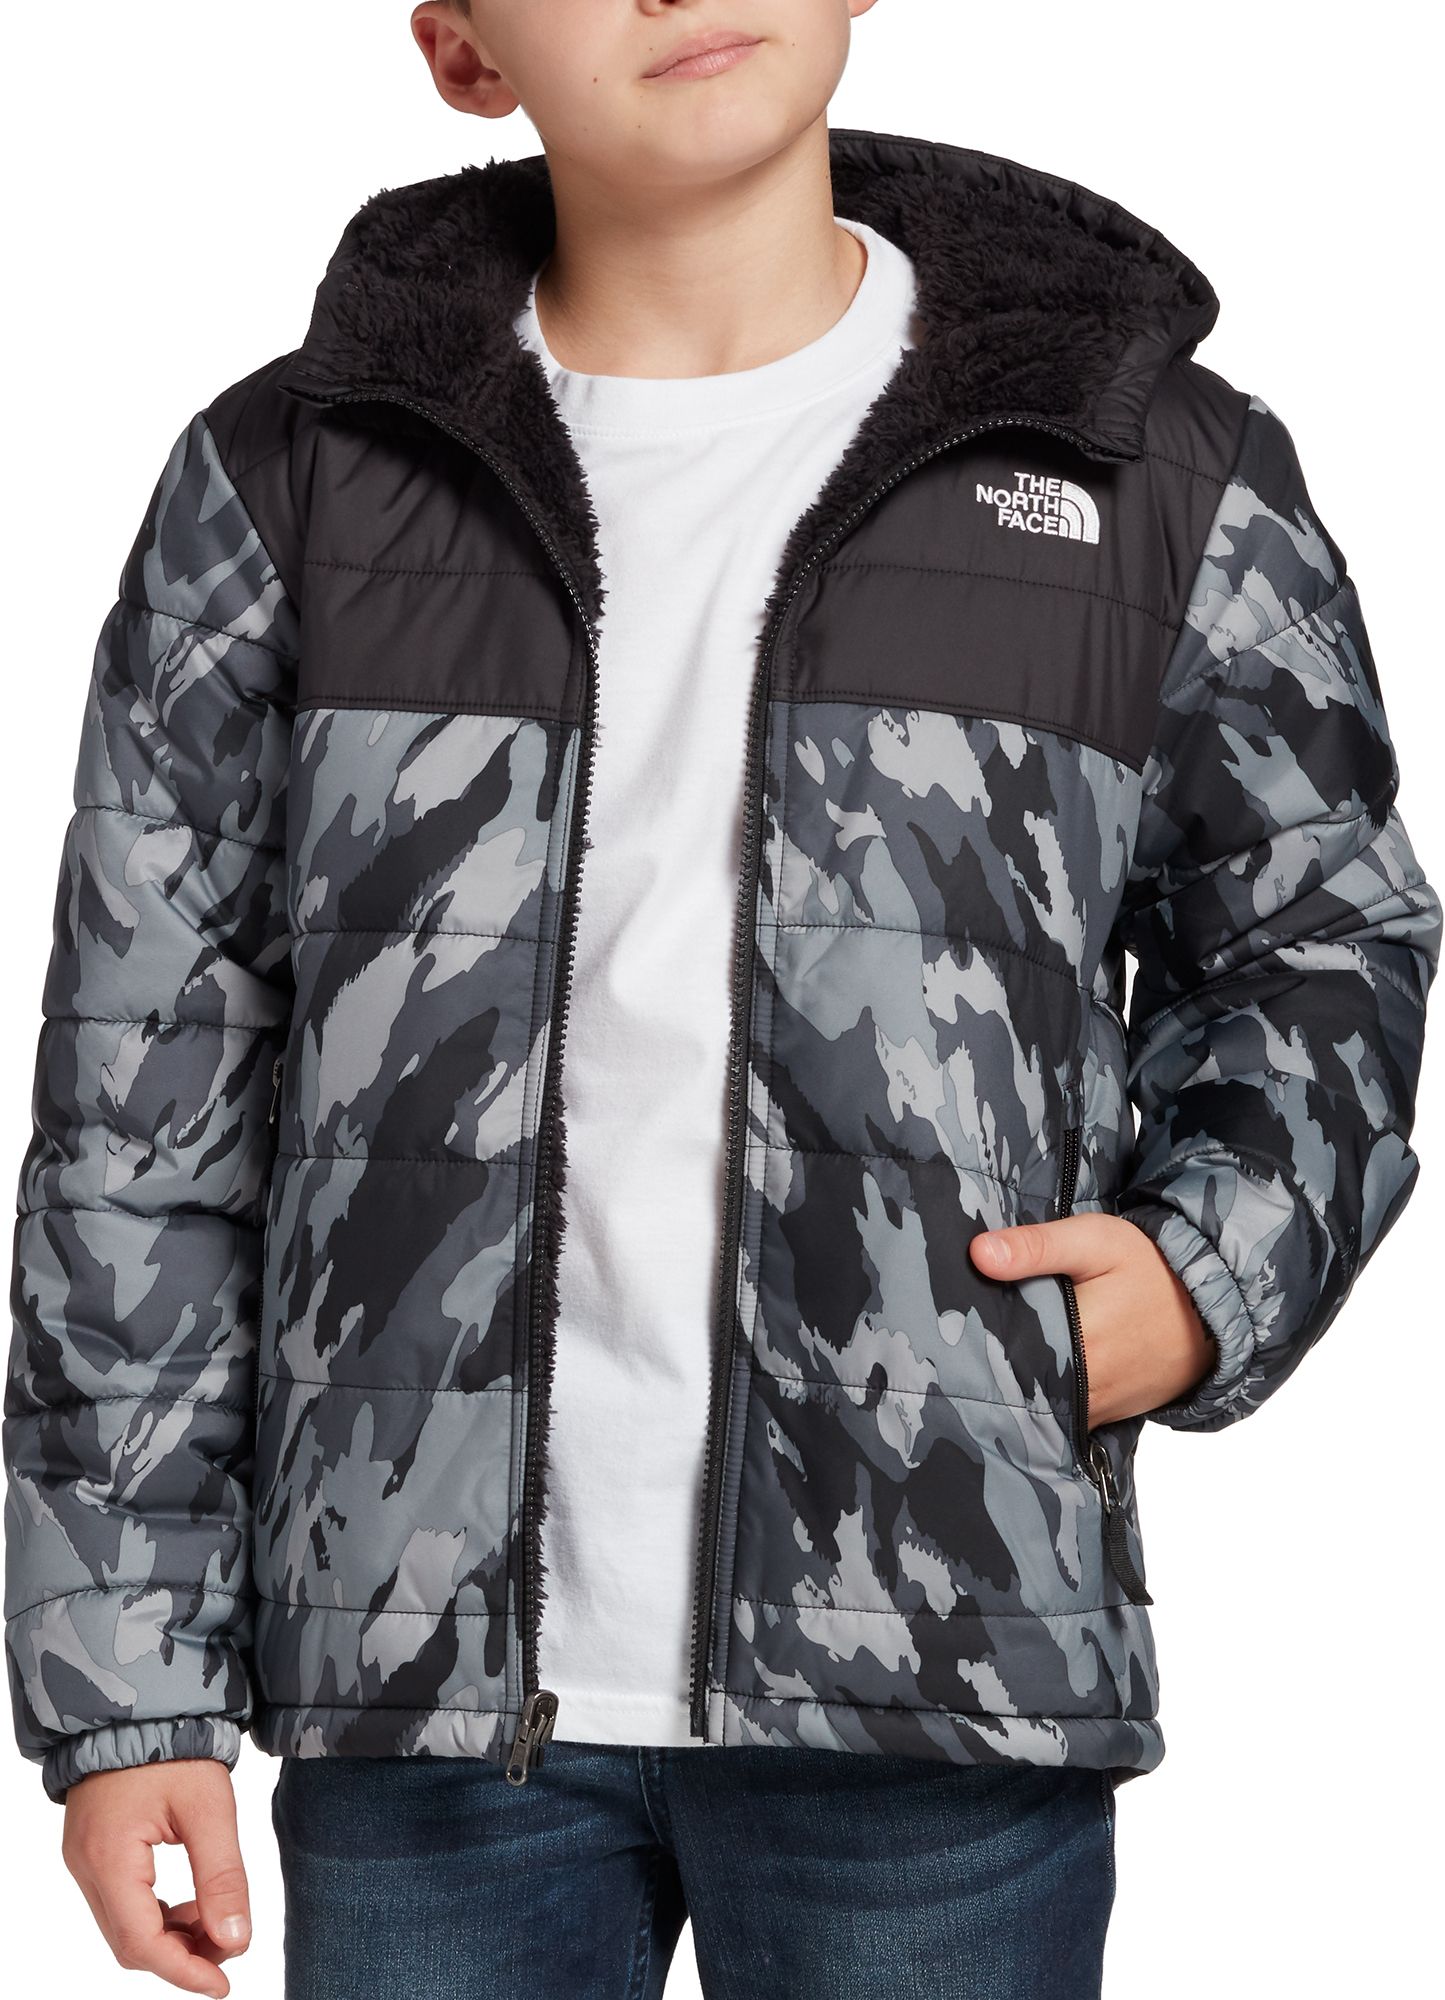 north face childrens jackets